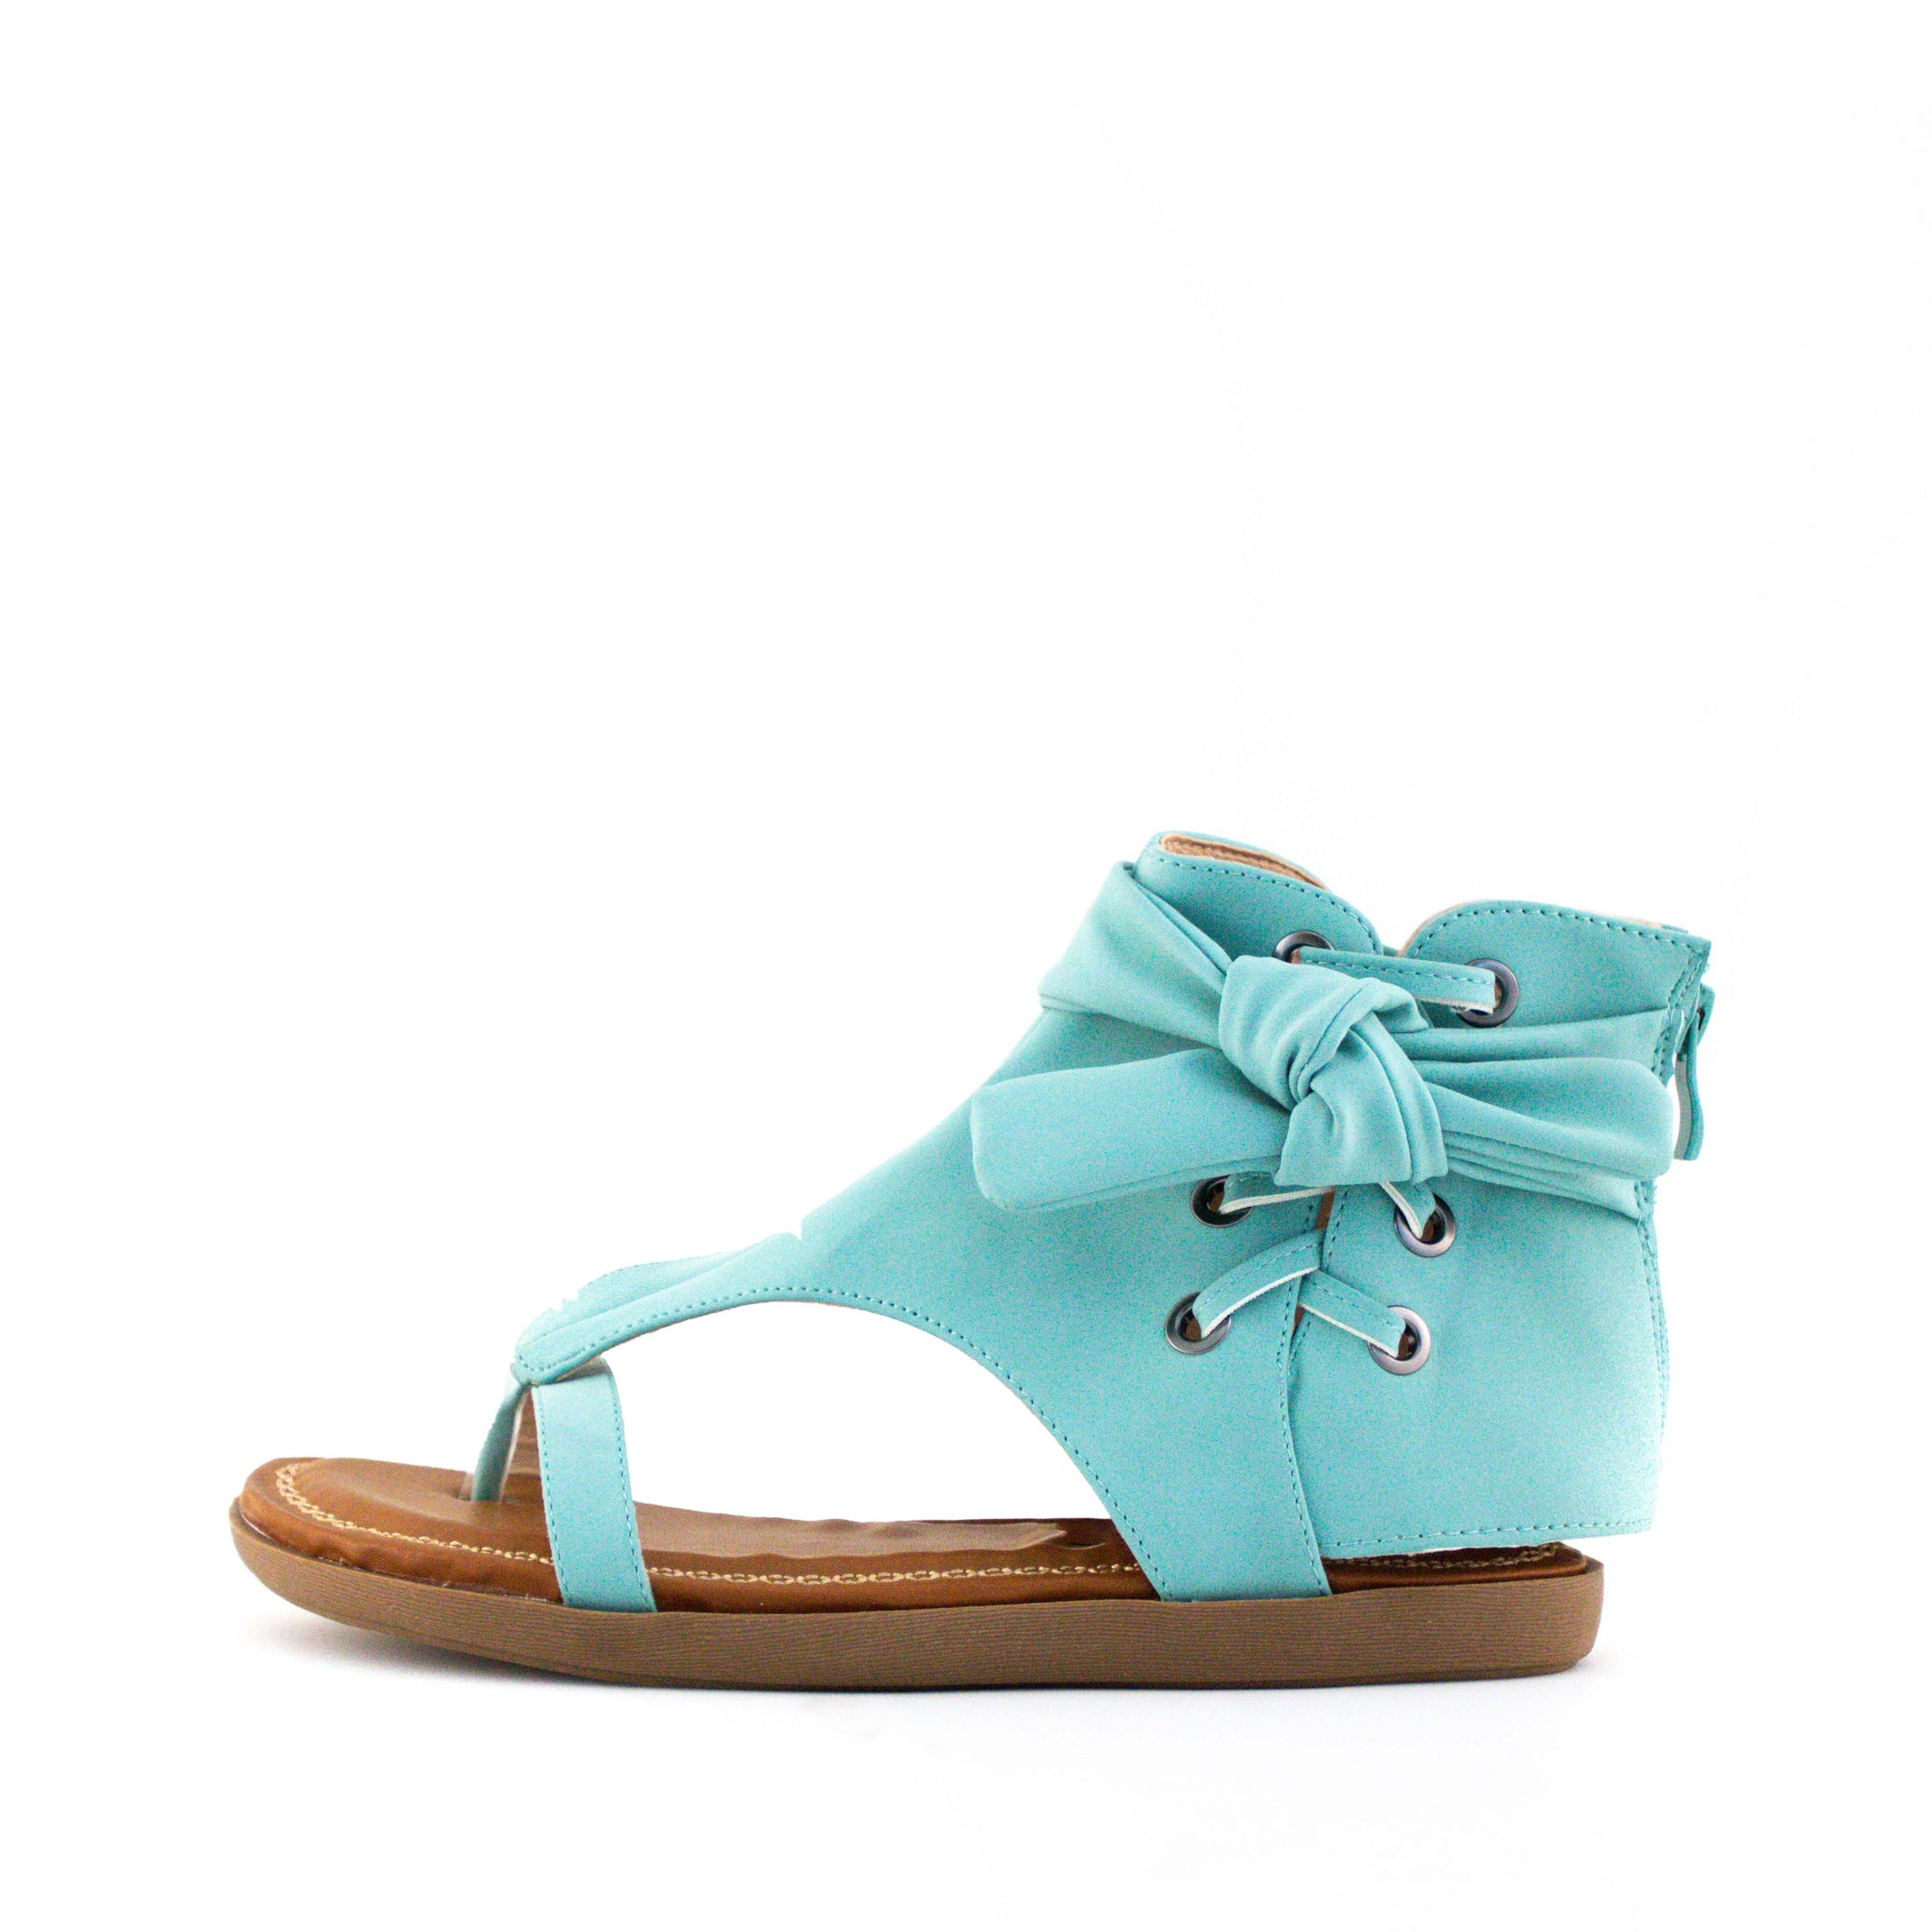 Buy Women's Chi Lace Detail Gladiator Sandal Turquoise by Nest Shoes